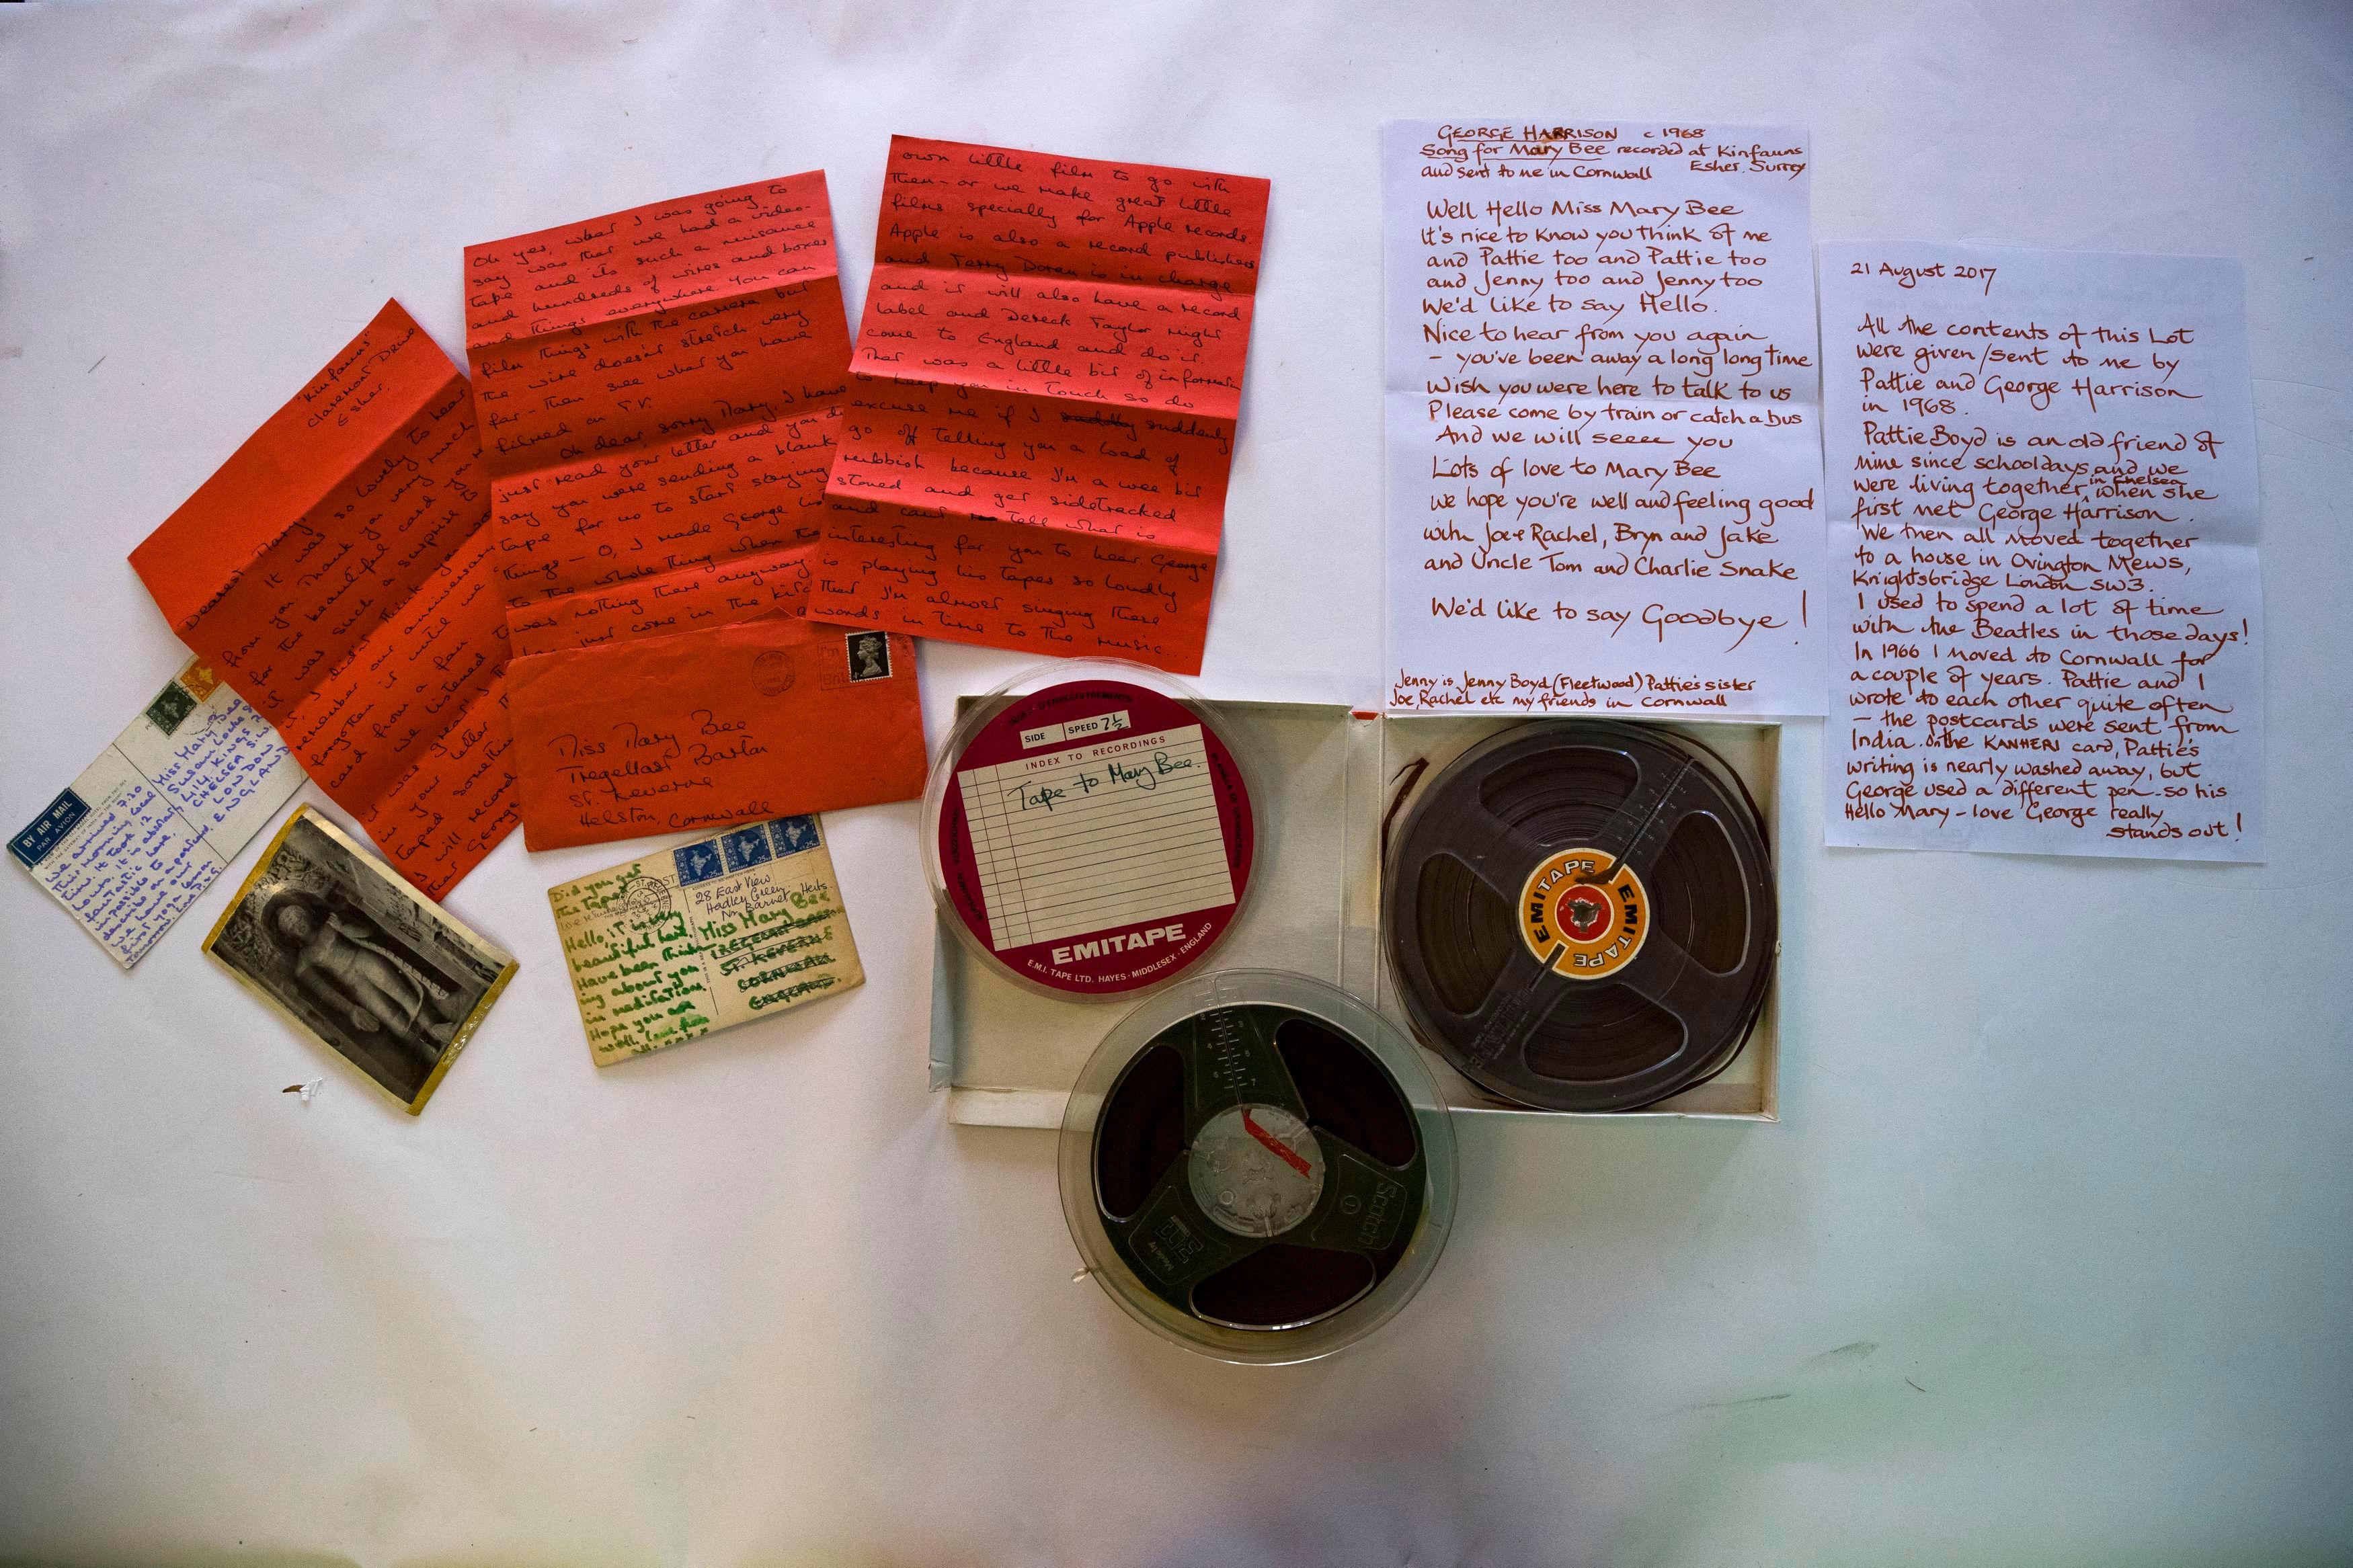  A reel to reel tape of a song by and letters from his former wife, Patty, to Mary Bee are to go under the hammer